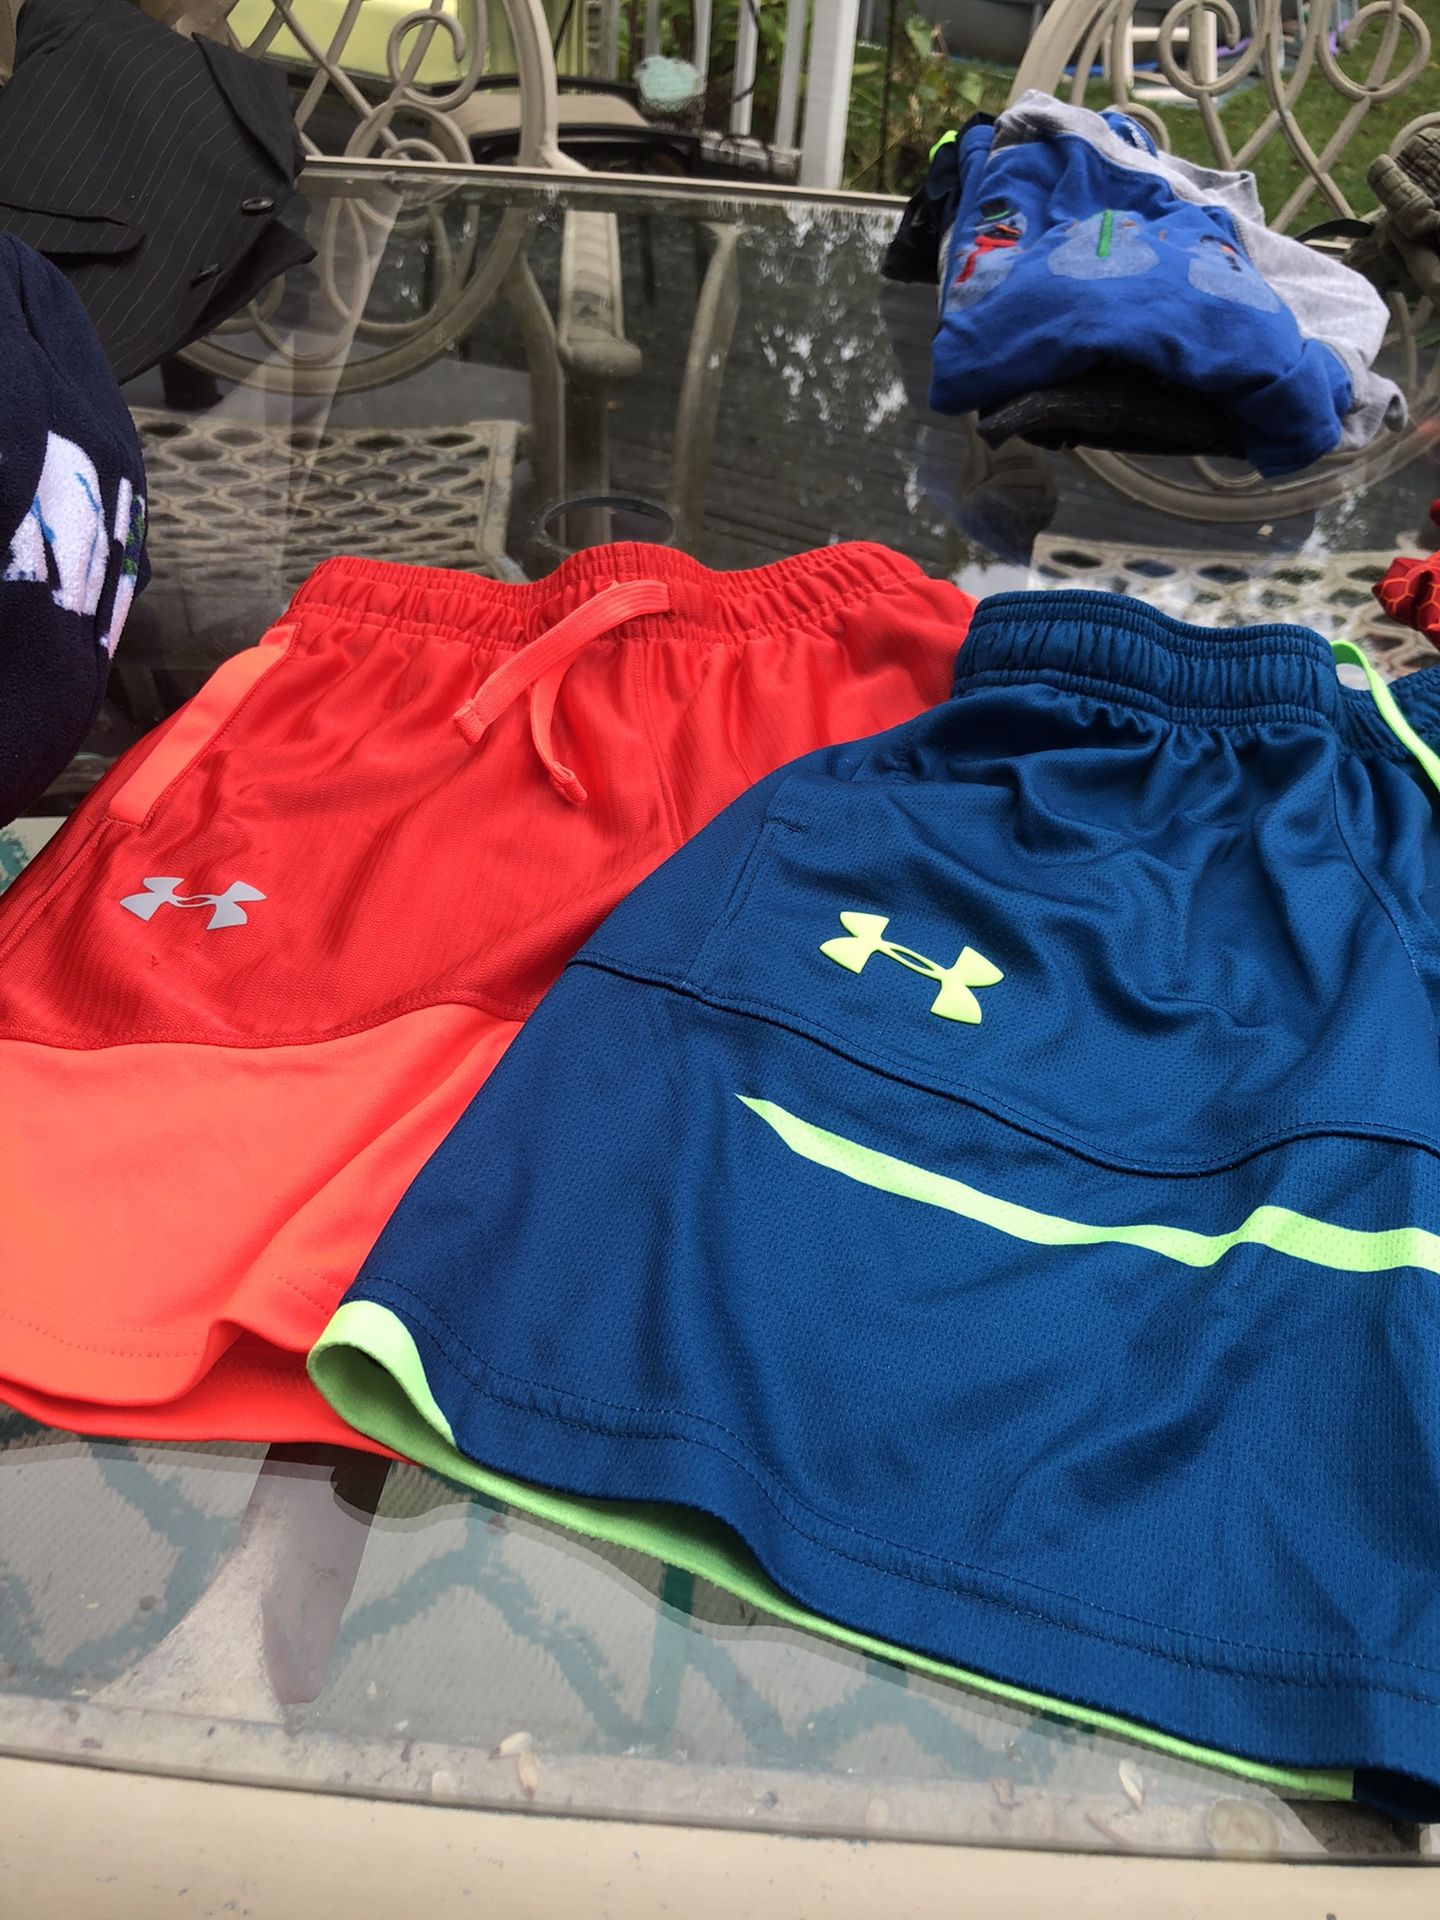 under armor shirts or shirts $7 each   I think size seven 